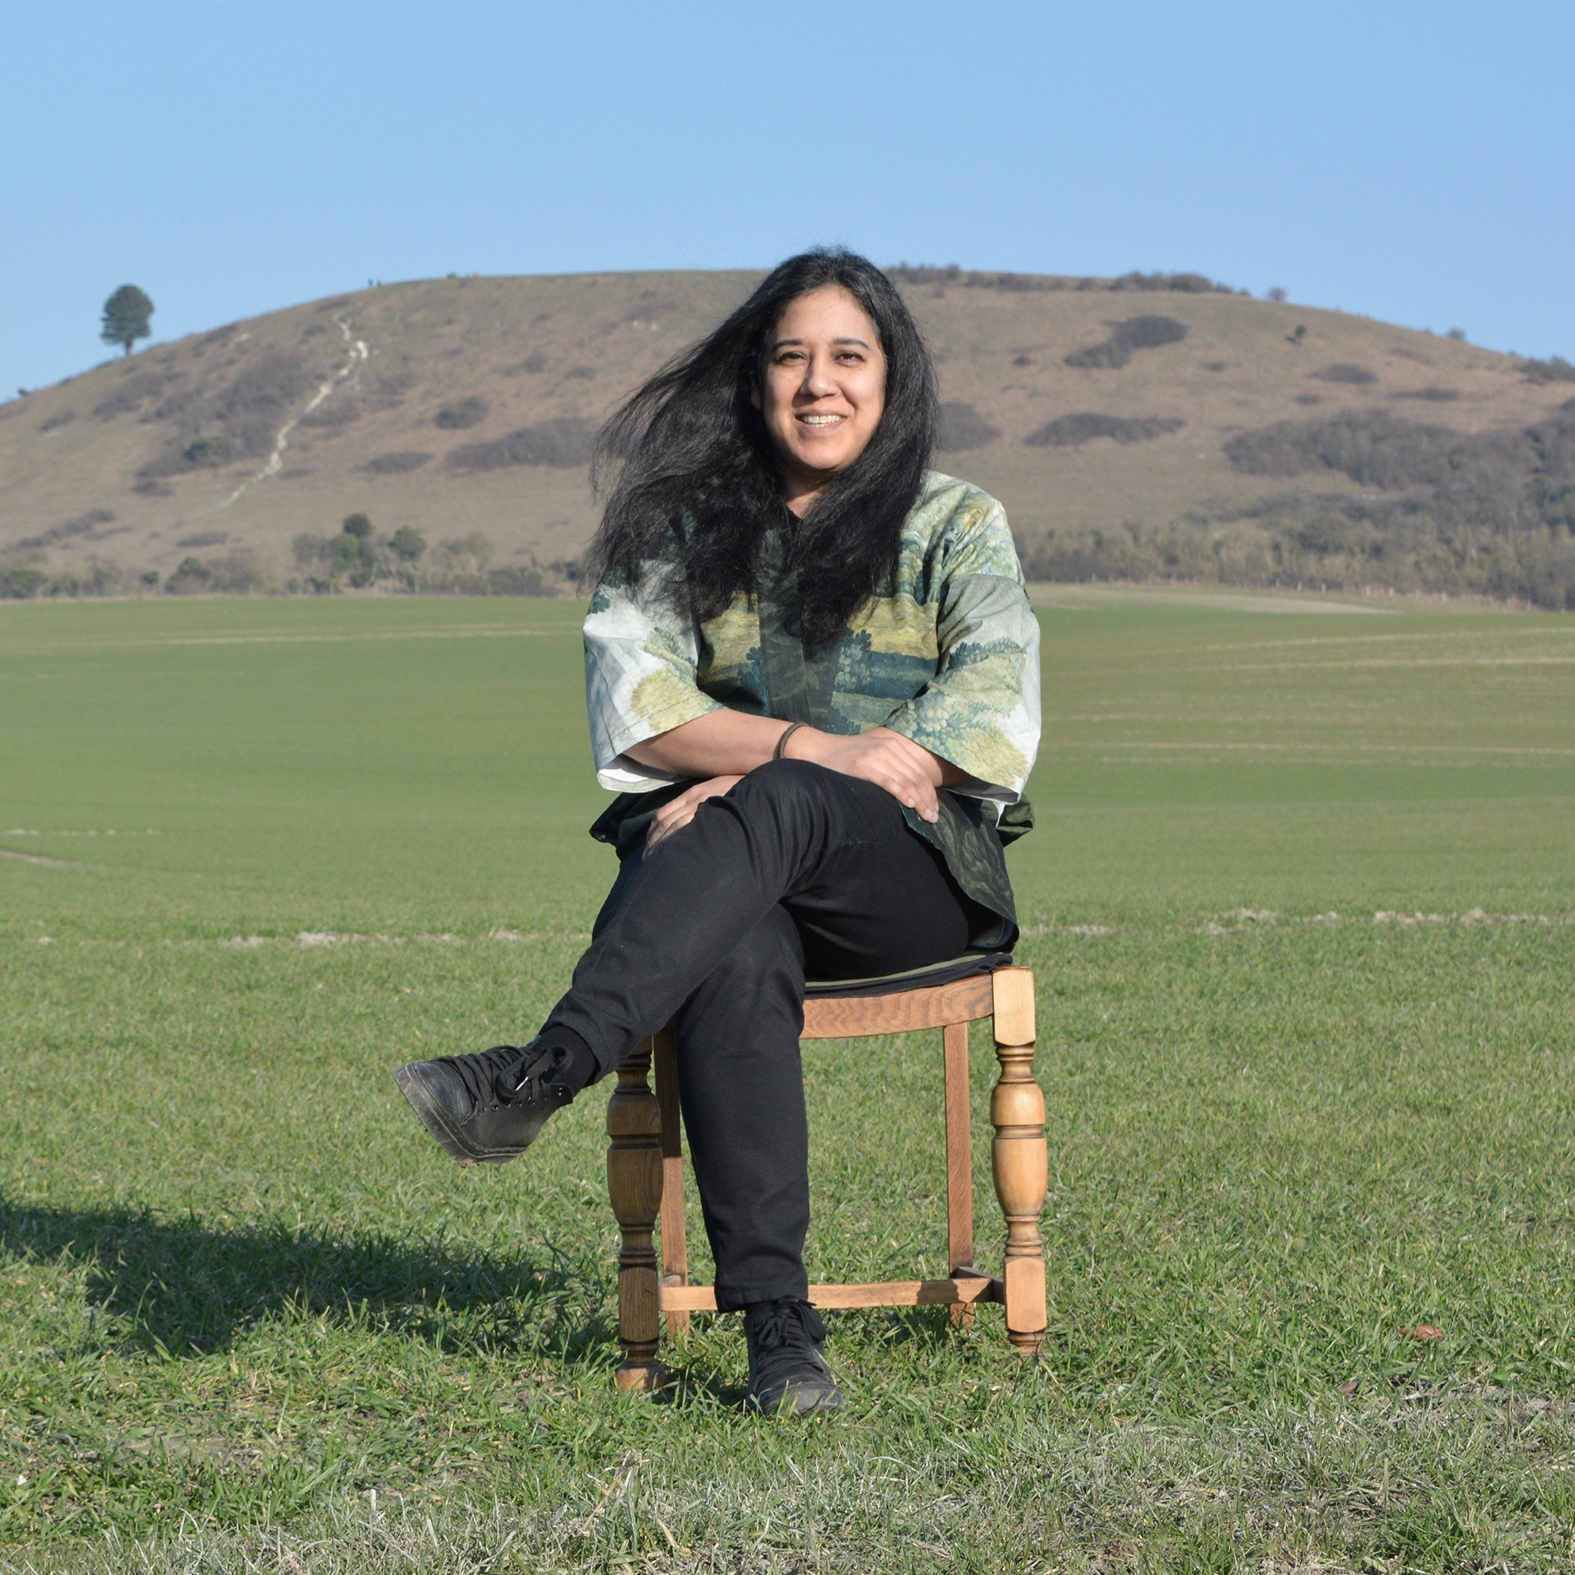 A profile picture of Natalie Thakur sitting on a chair in a green field with The Chiltern Hills in the background